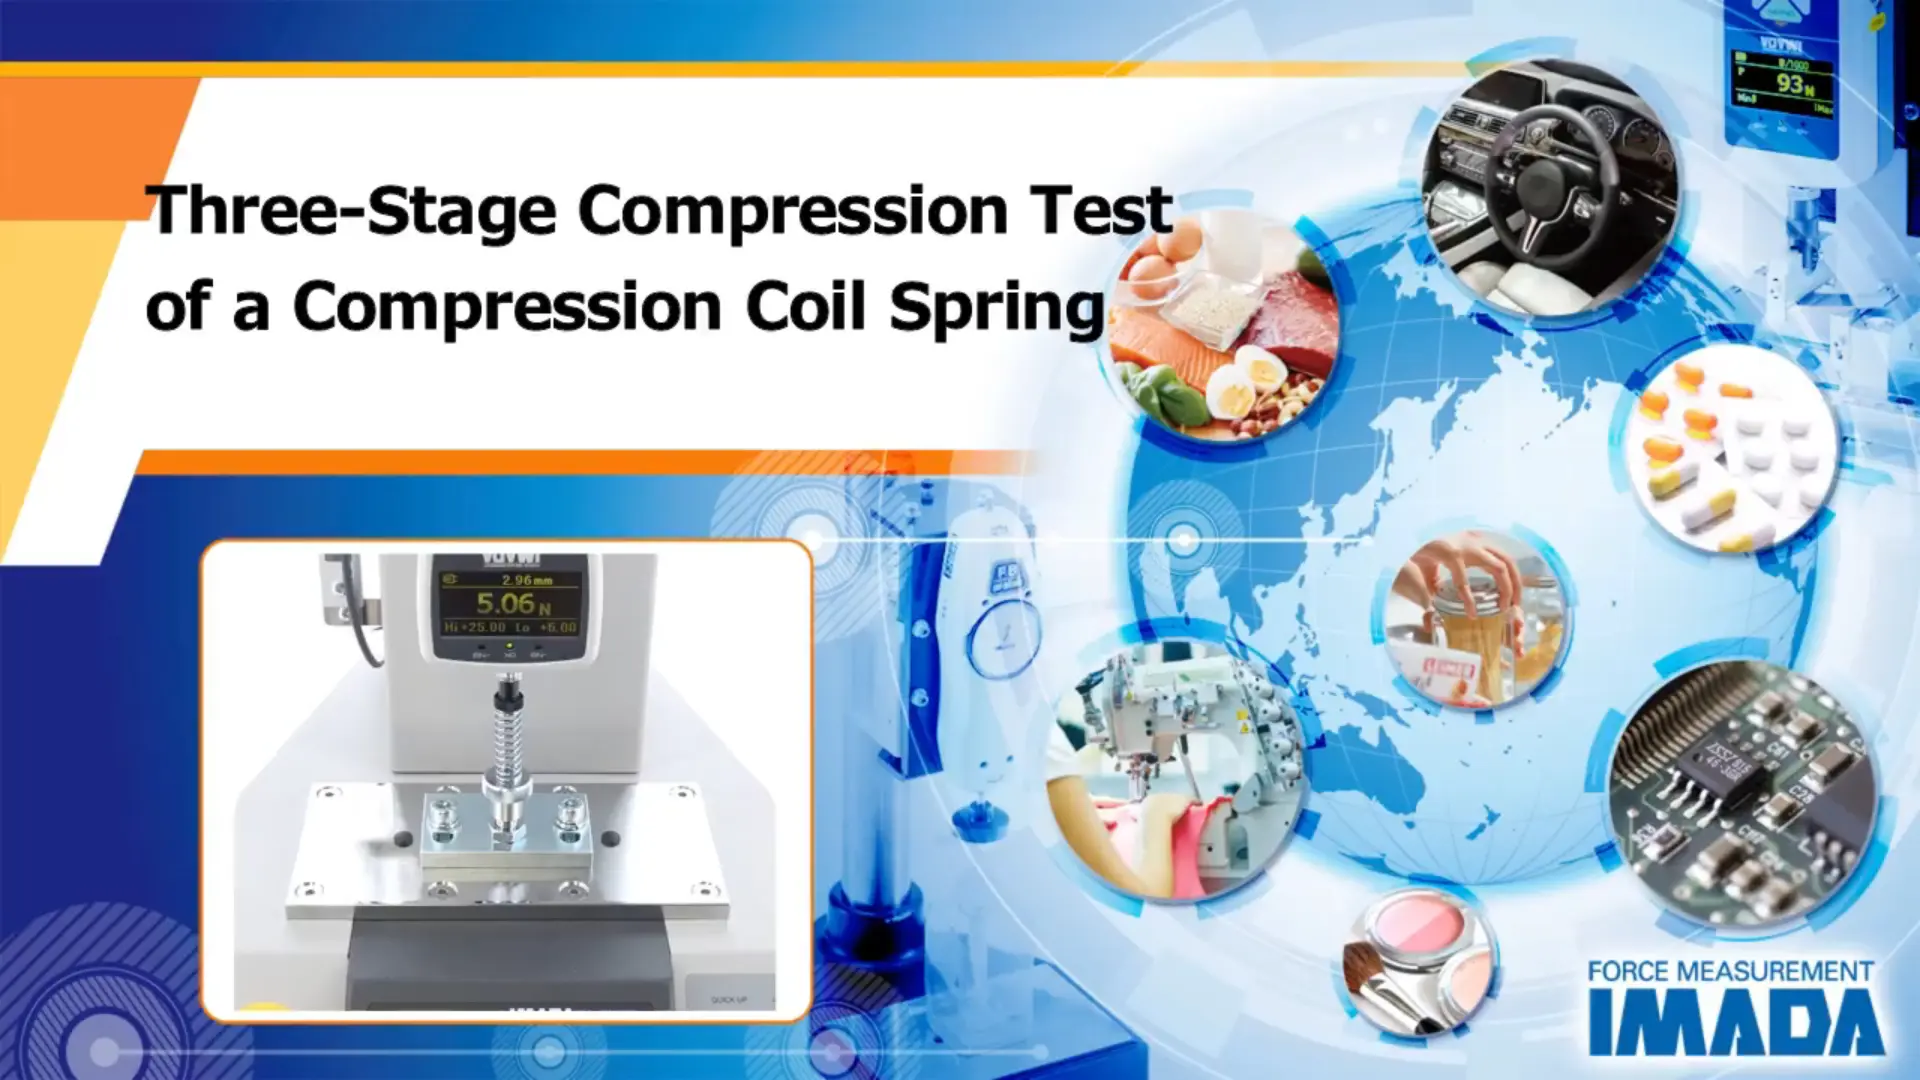 Three-stage compression test of a compression coil spring